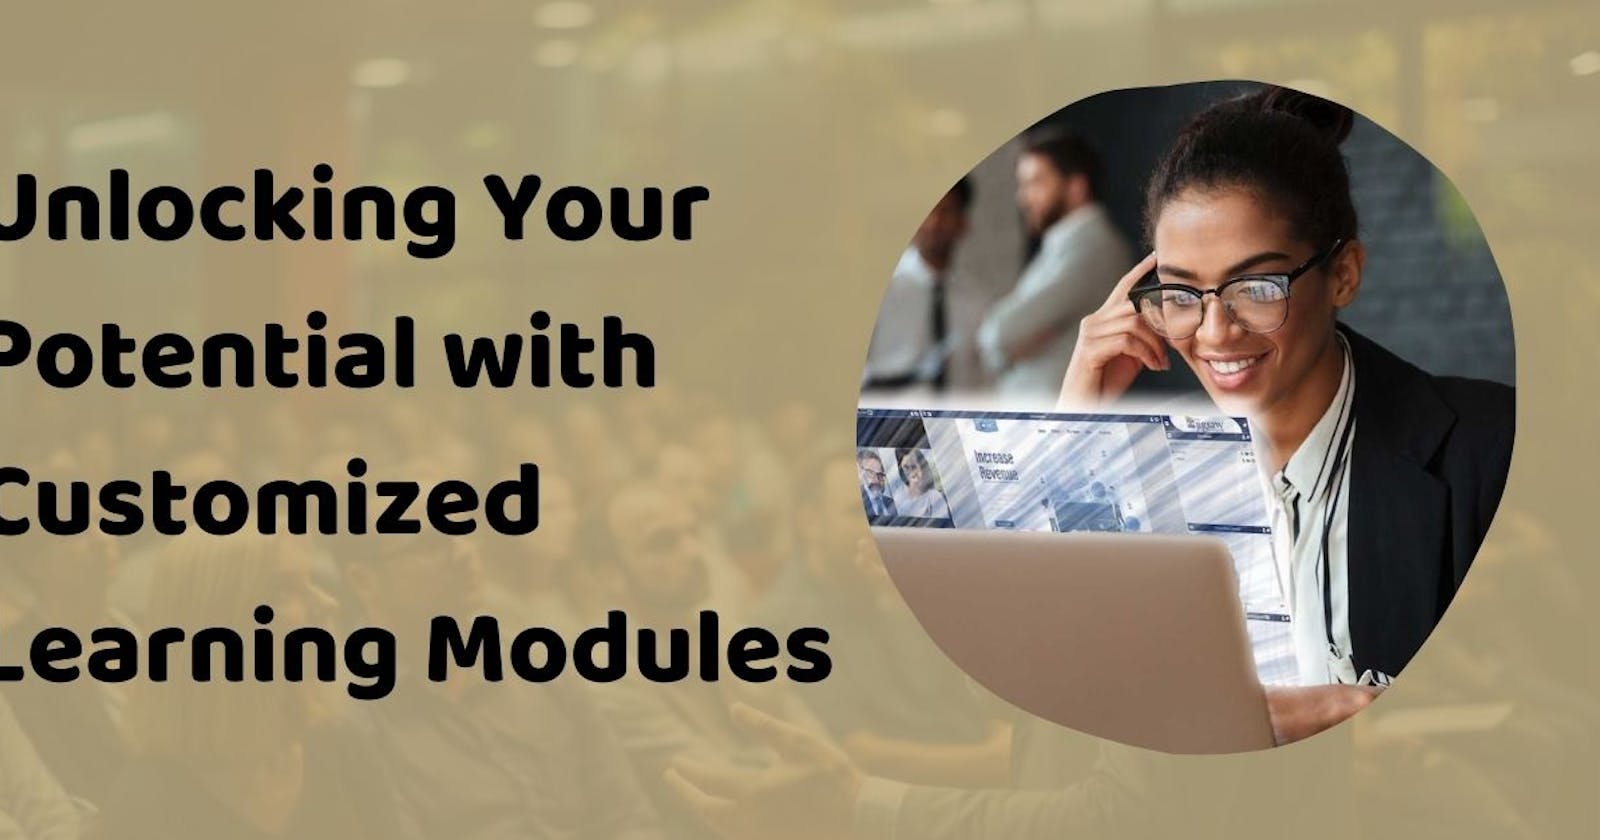 Unlocking Your Potential with Customized Learning Modules